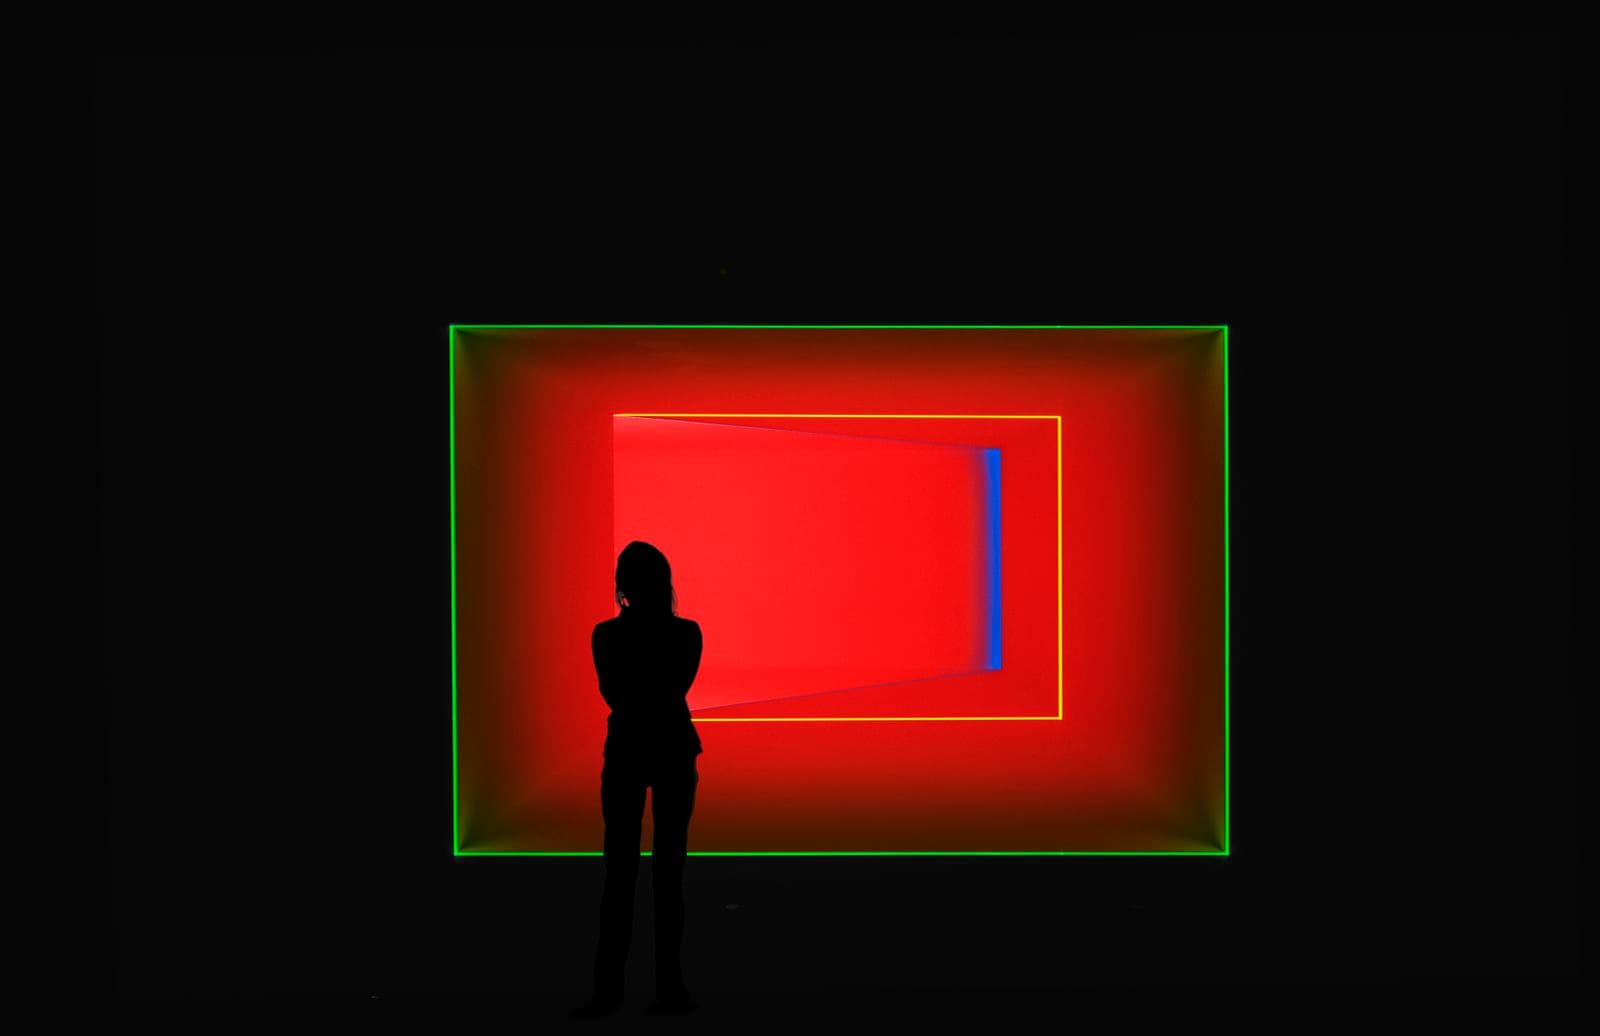 A figure is silhouetted against a bright red box outlined in green that appears to continue endlessly into the wall